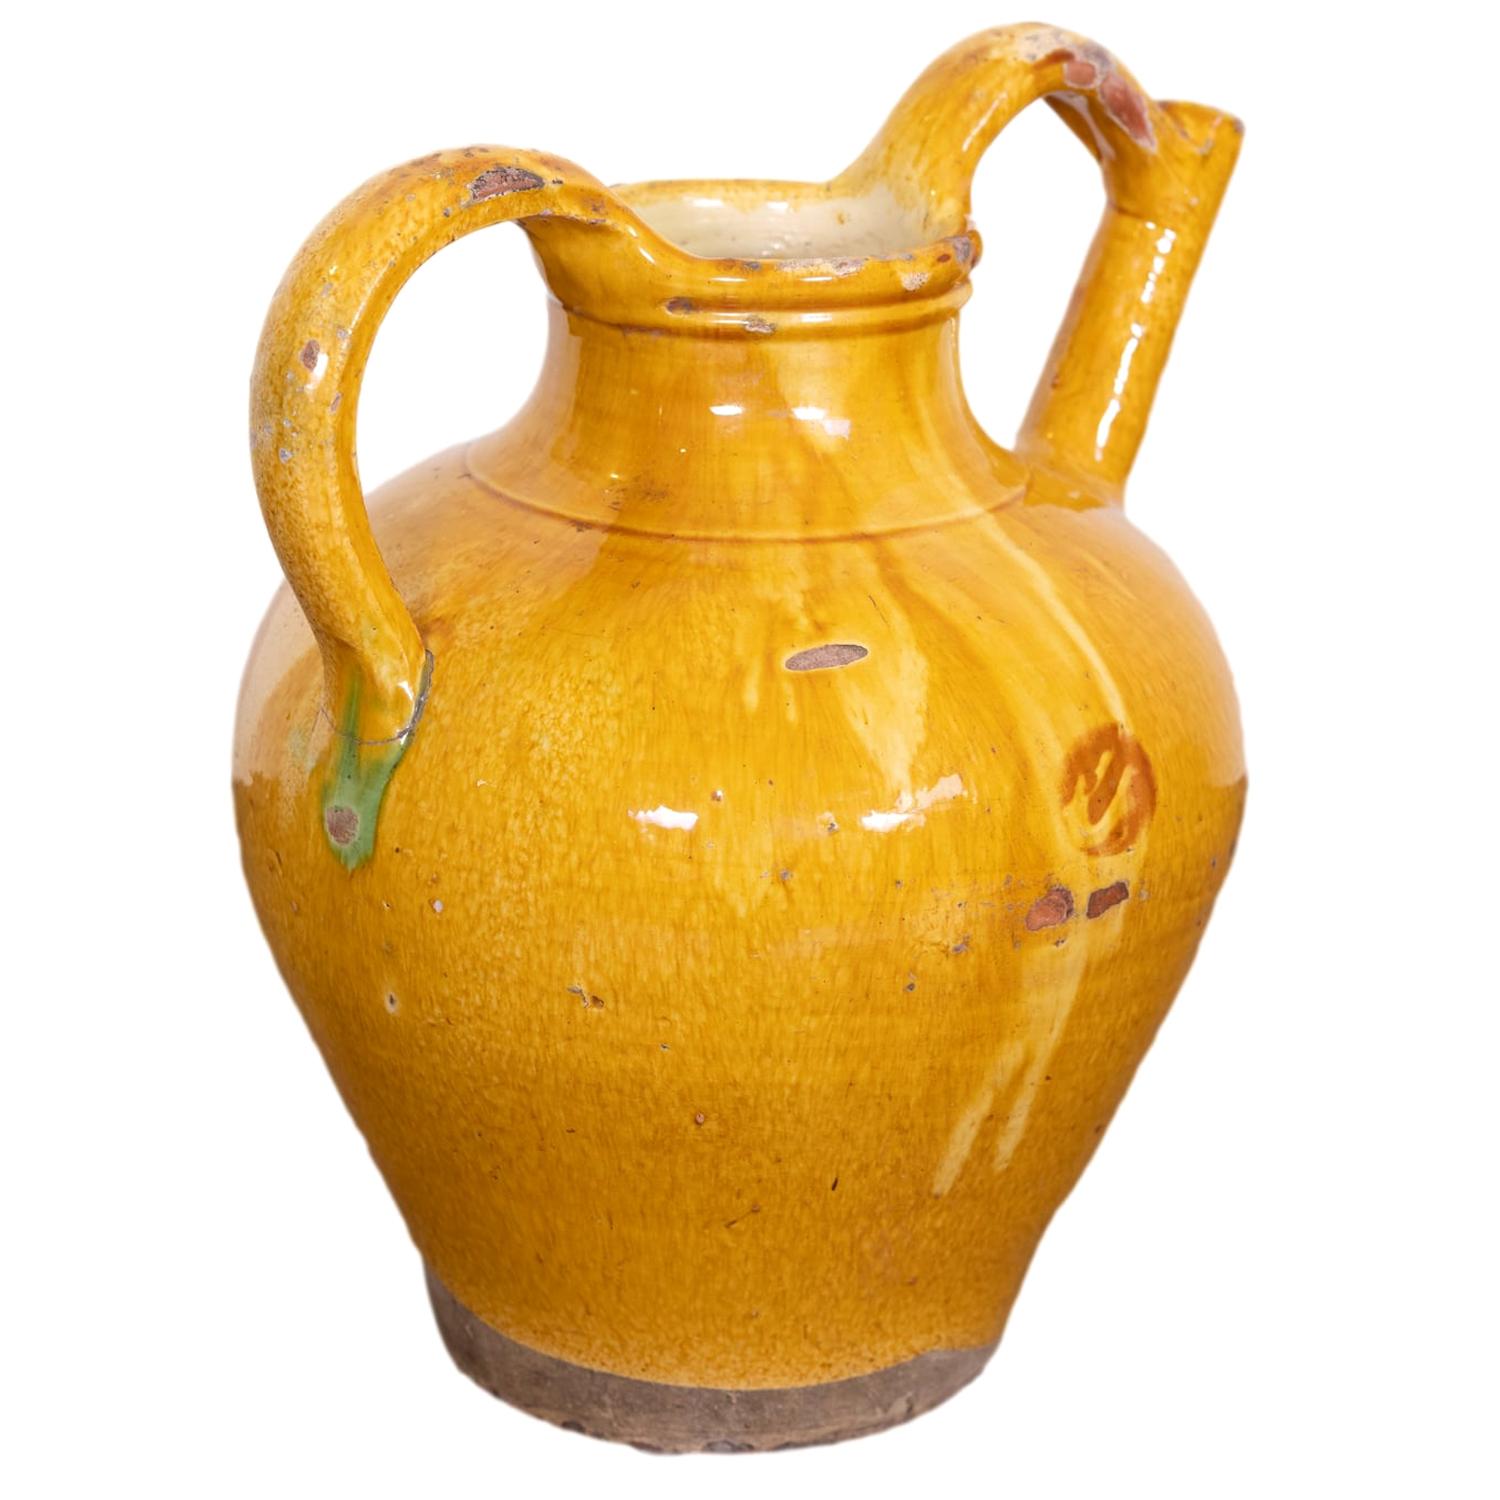 Large 19th Century French Cruche Orjol or Water Jug with Yellow Glaze